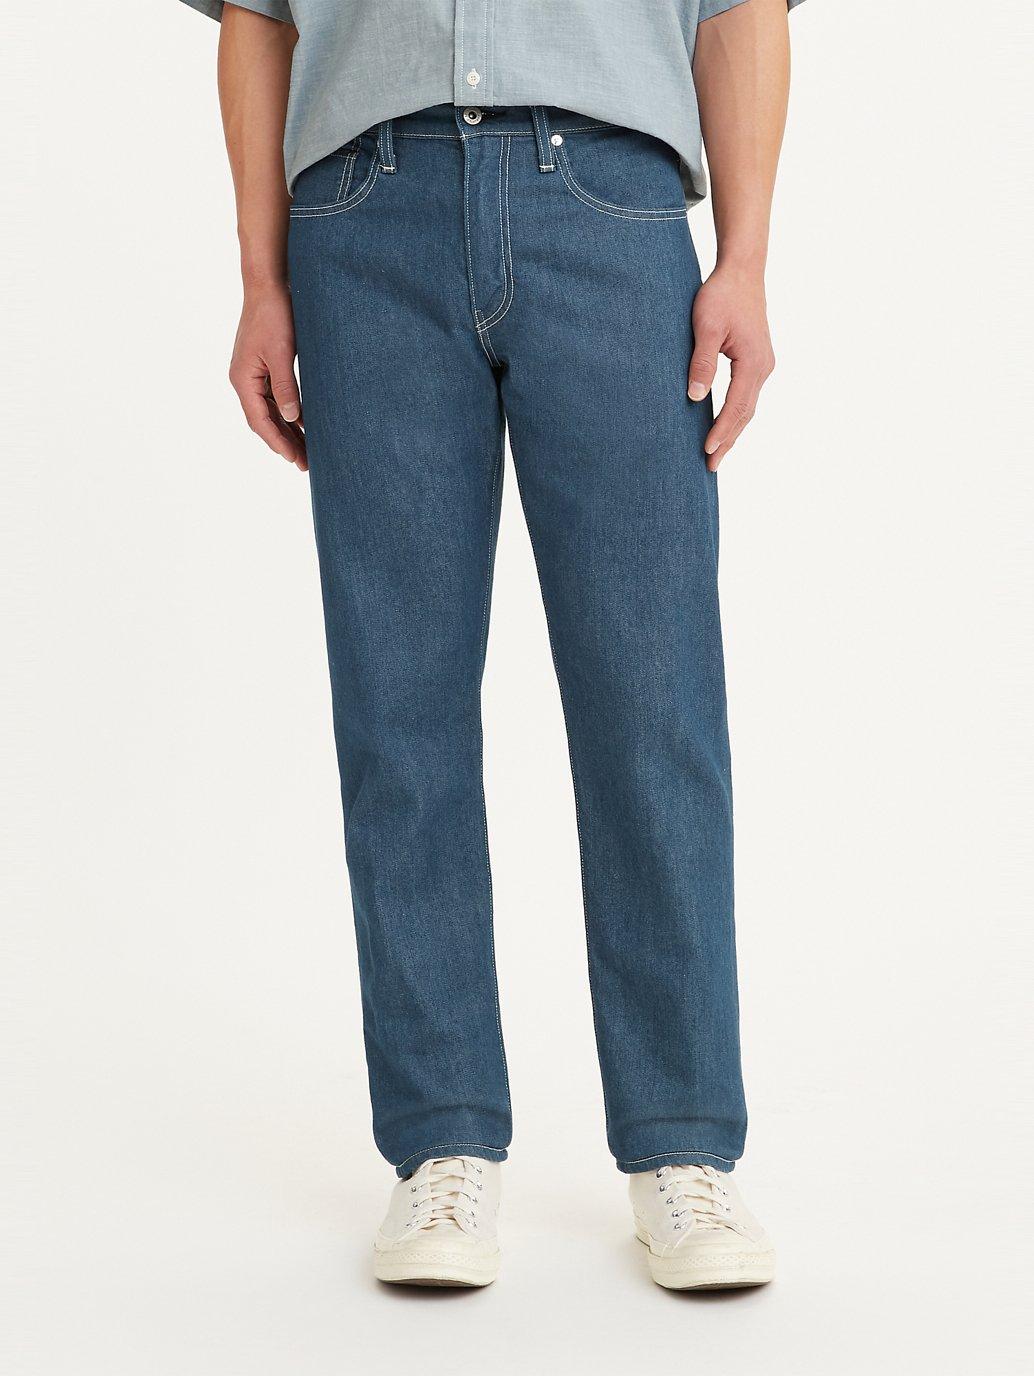 Buy Levi's® Made & Crafted® Men's 502™ Taper Jeans | Levi's Official Online  Store SG